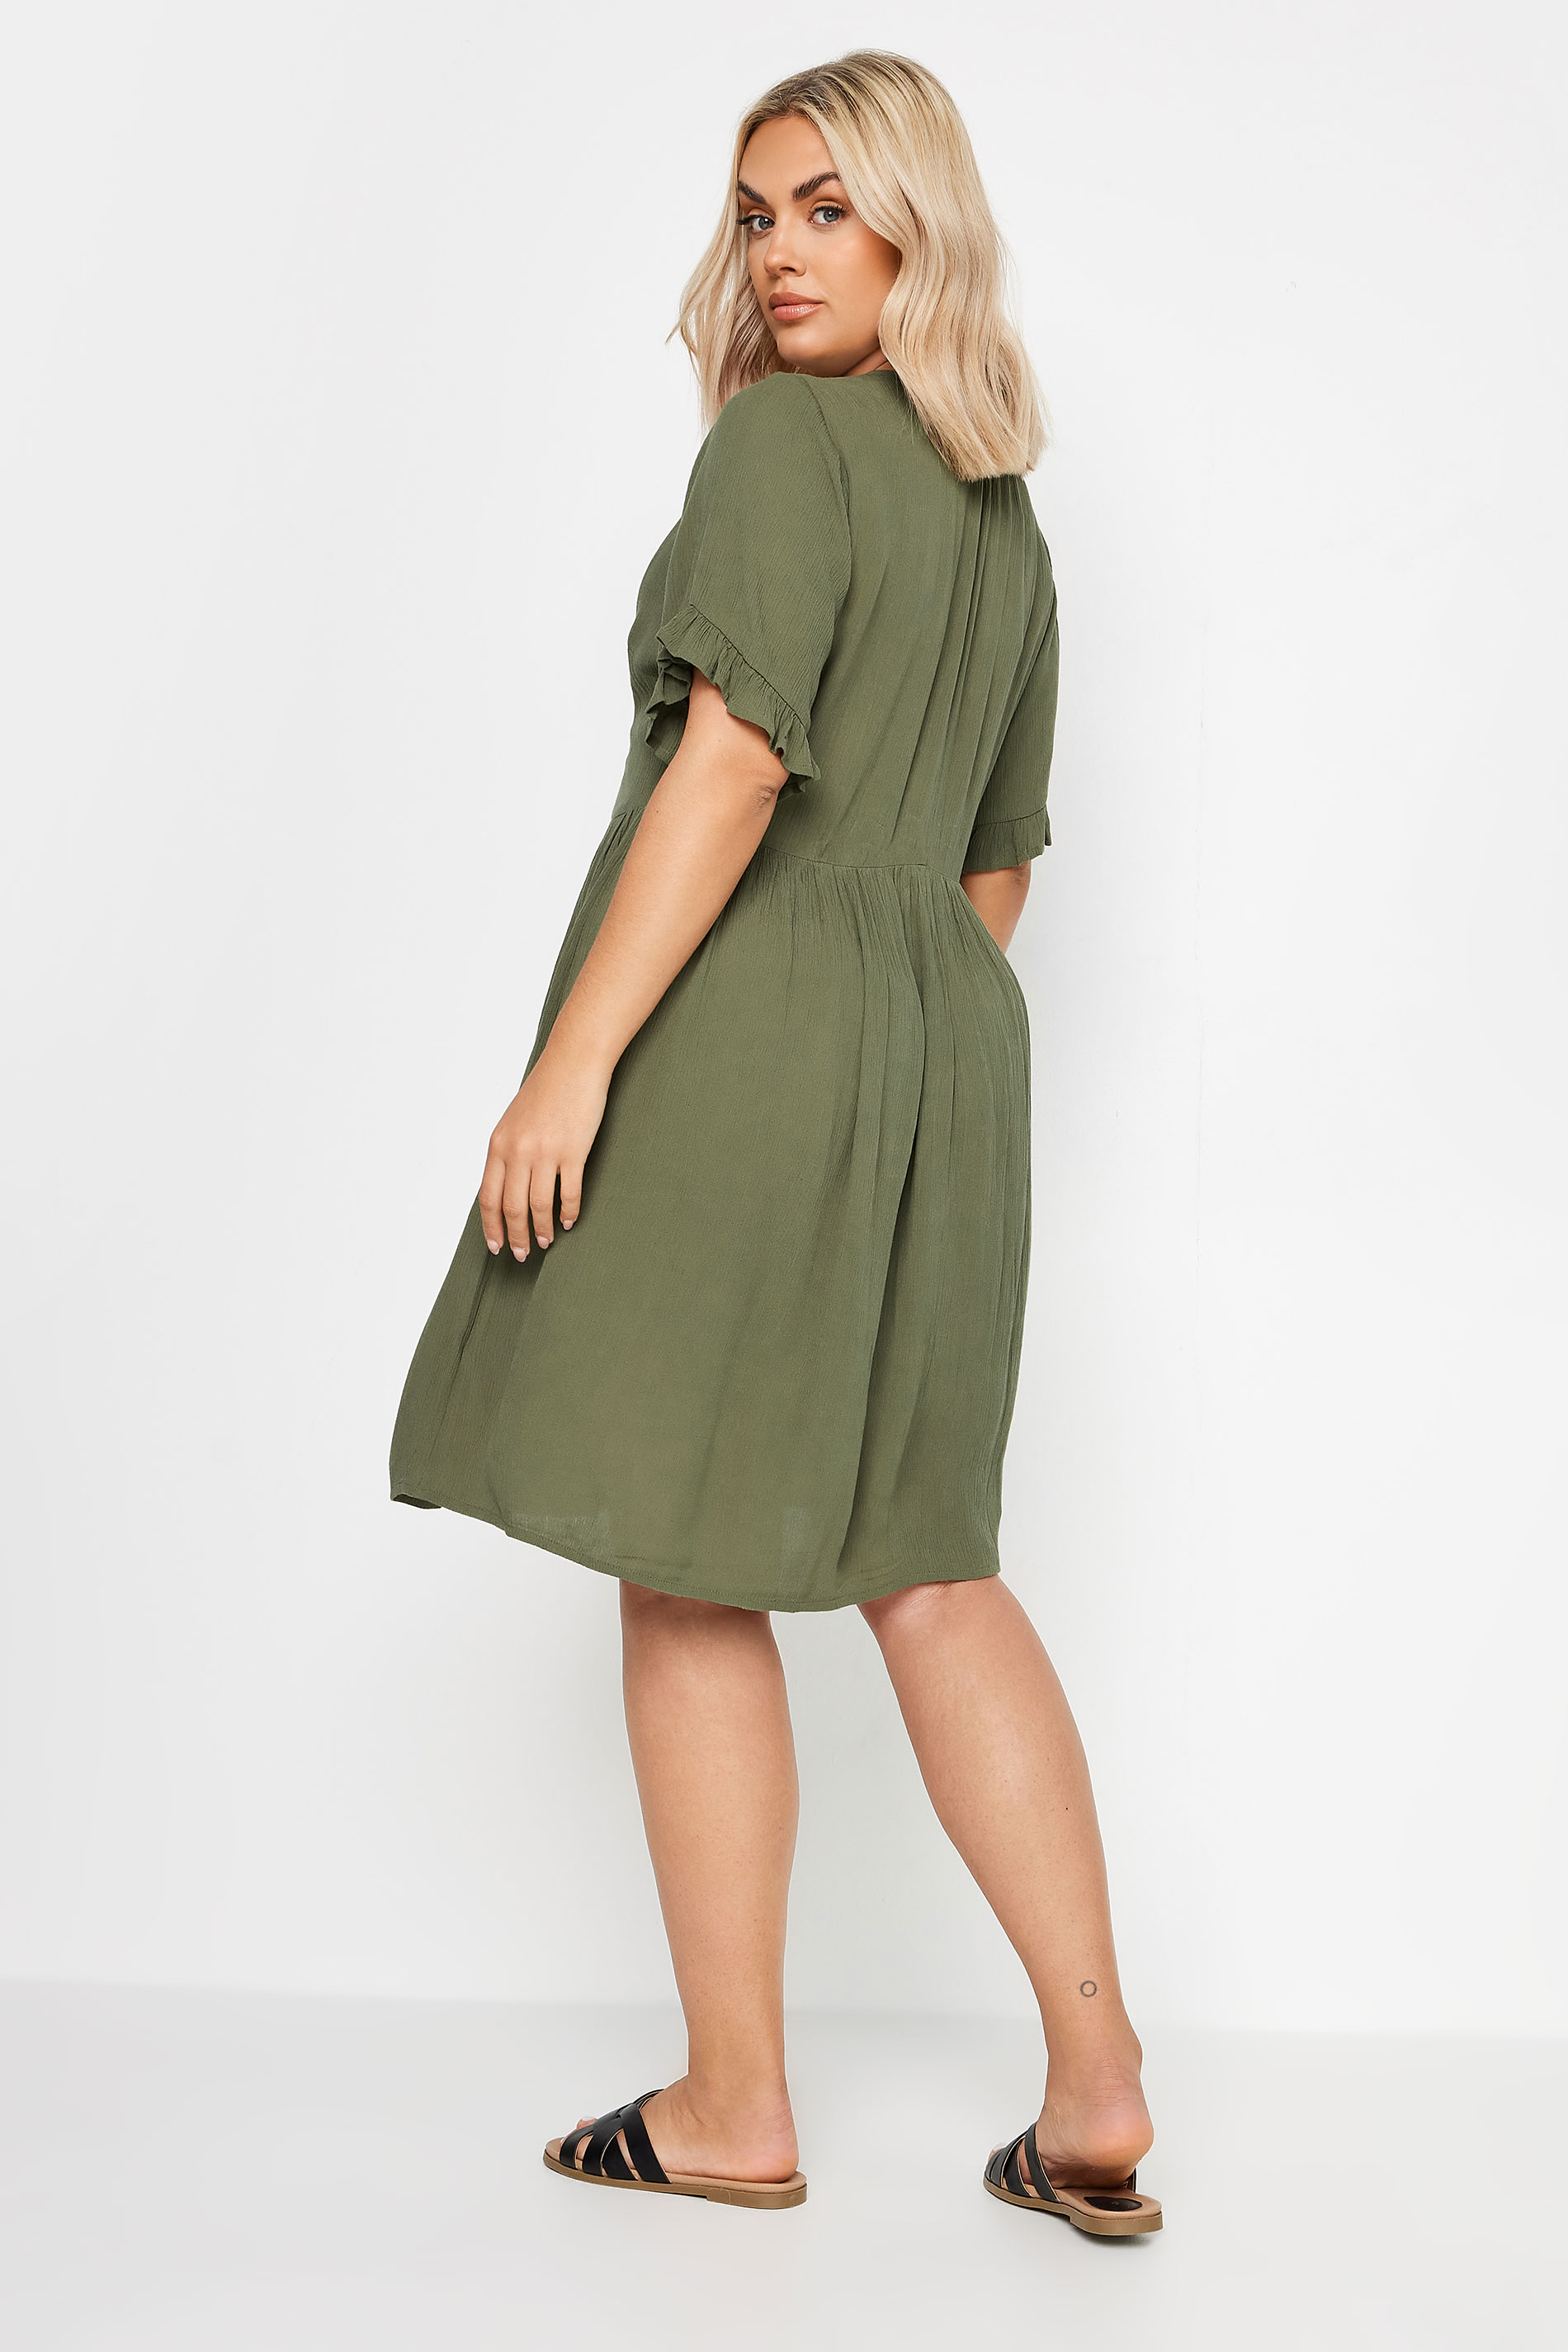 YOURS Plus Size Khaki Green Crinkle Tie Neck Dress | Yours Clothing 3